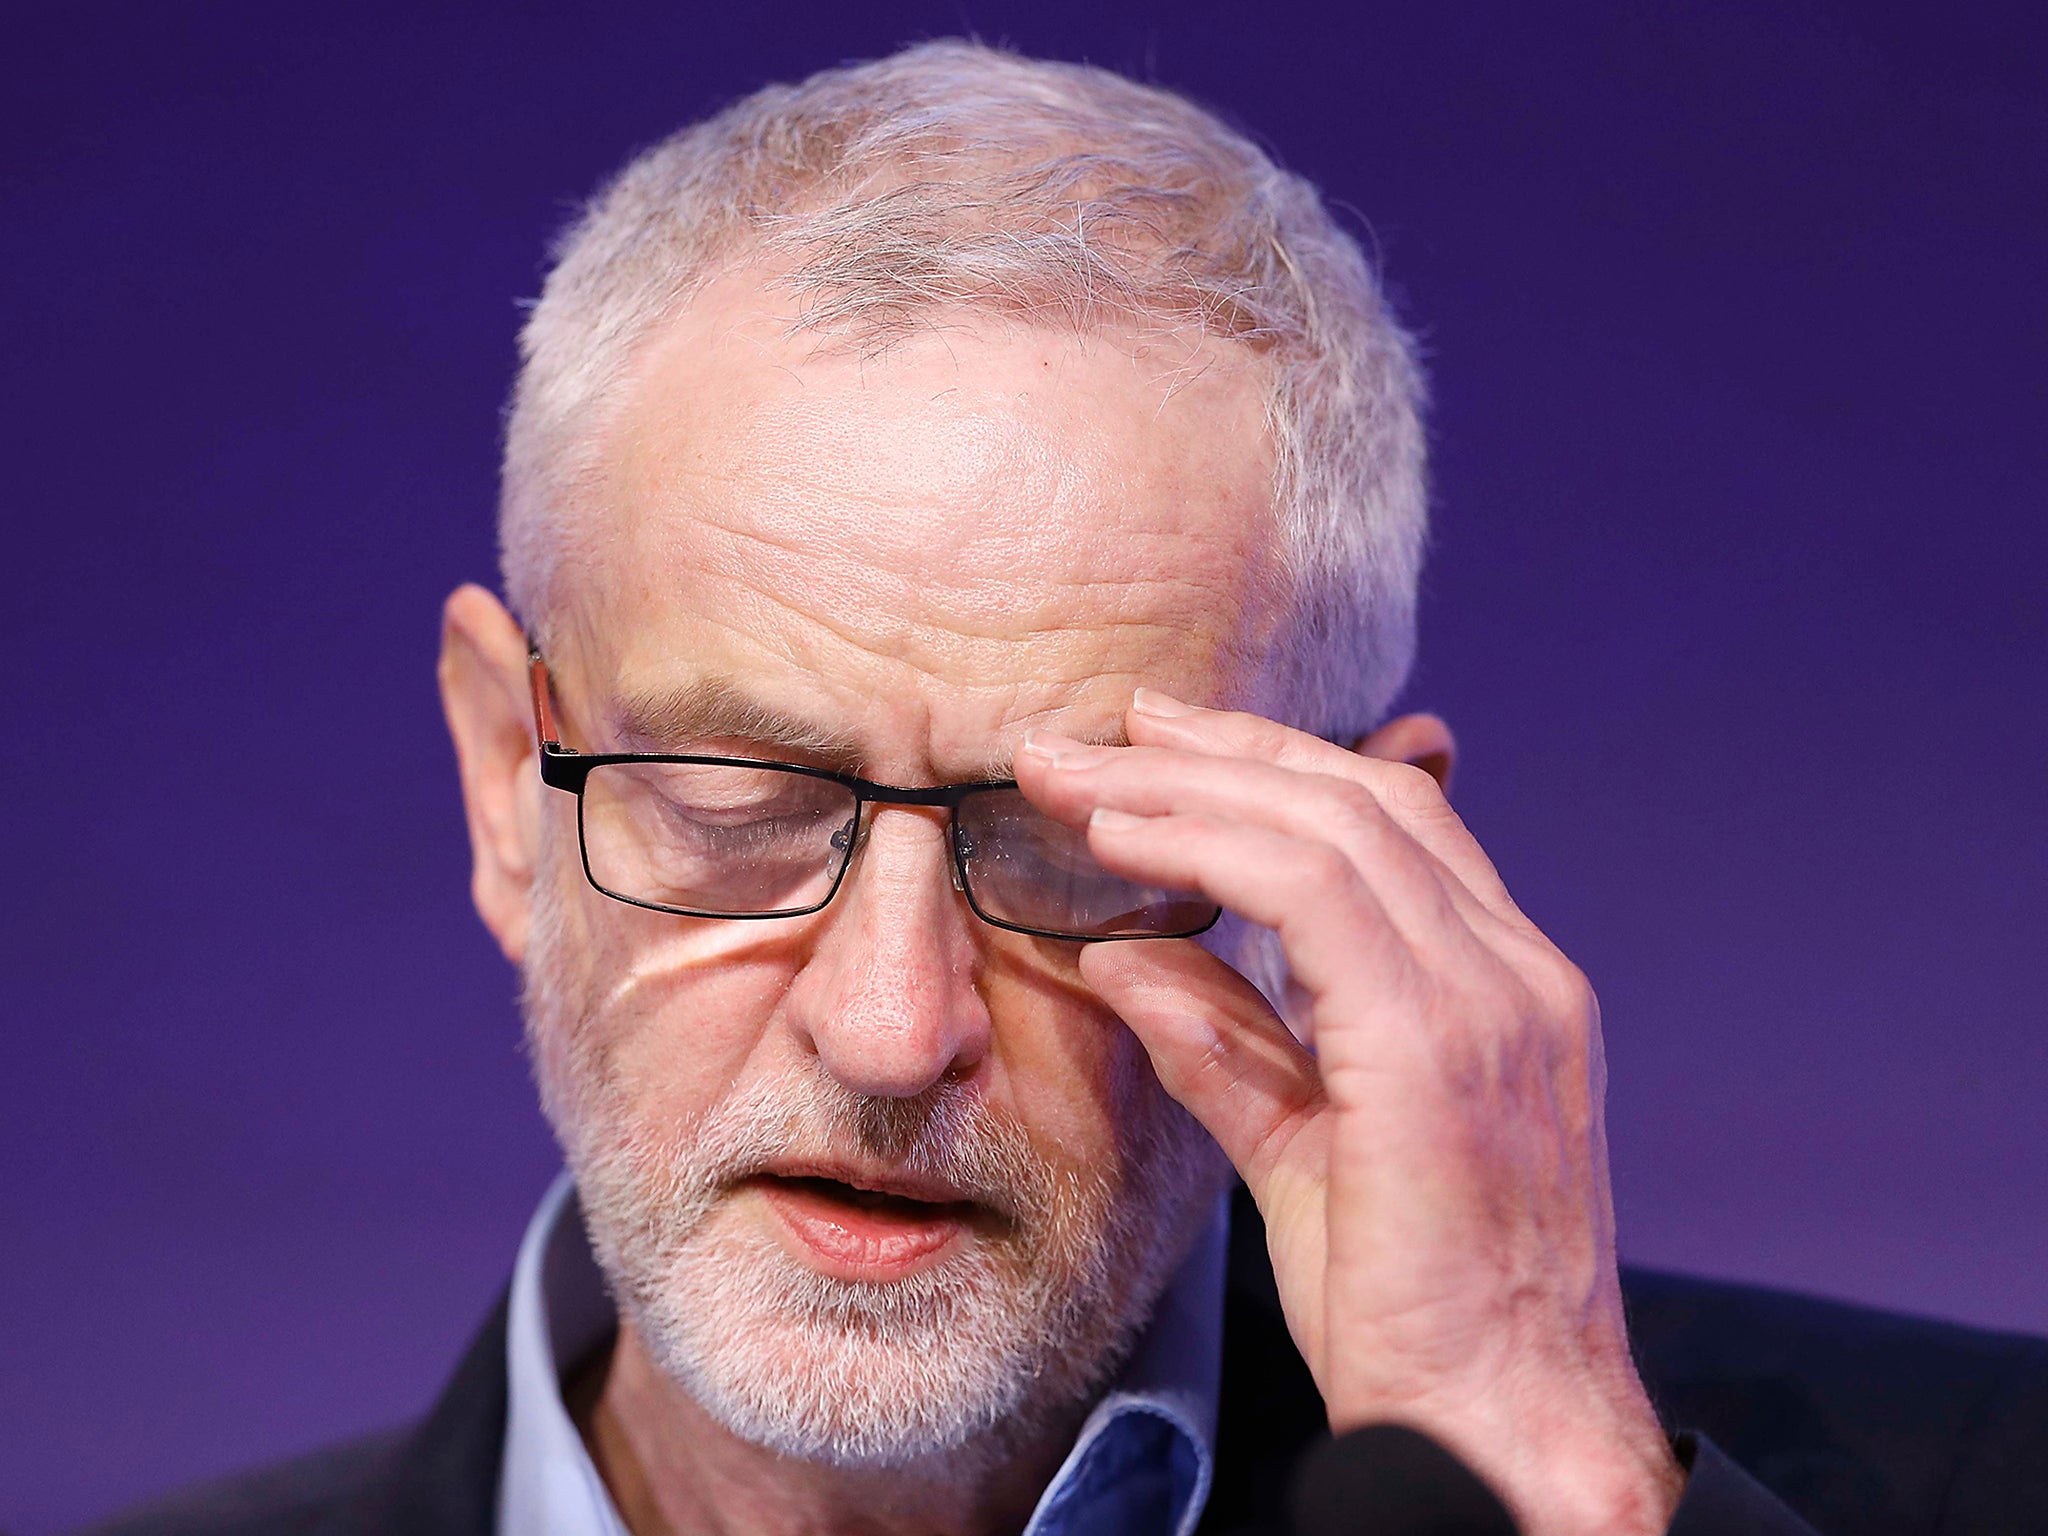 Corbyn has ruled out forming an alliance with the Greens to push back against the Tories in the general election